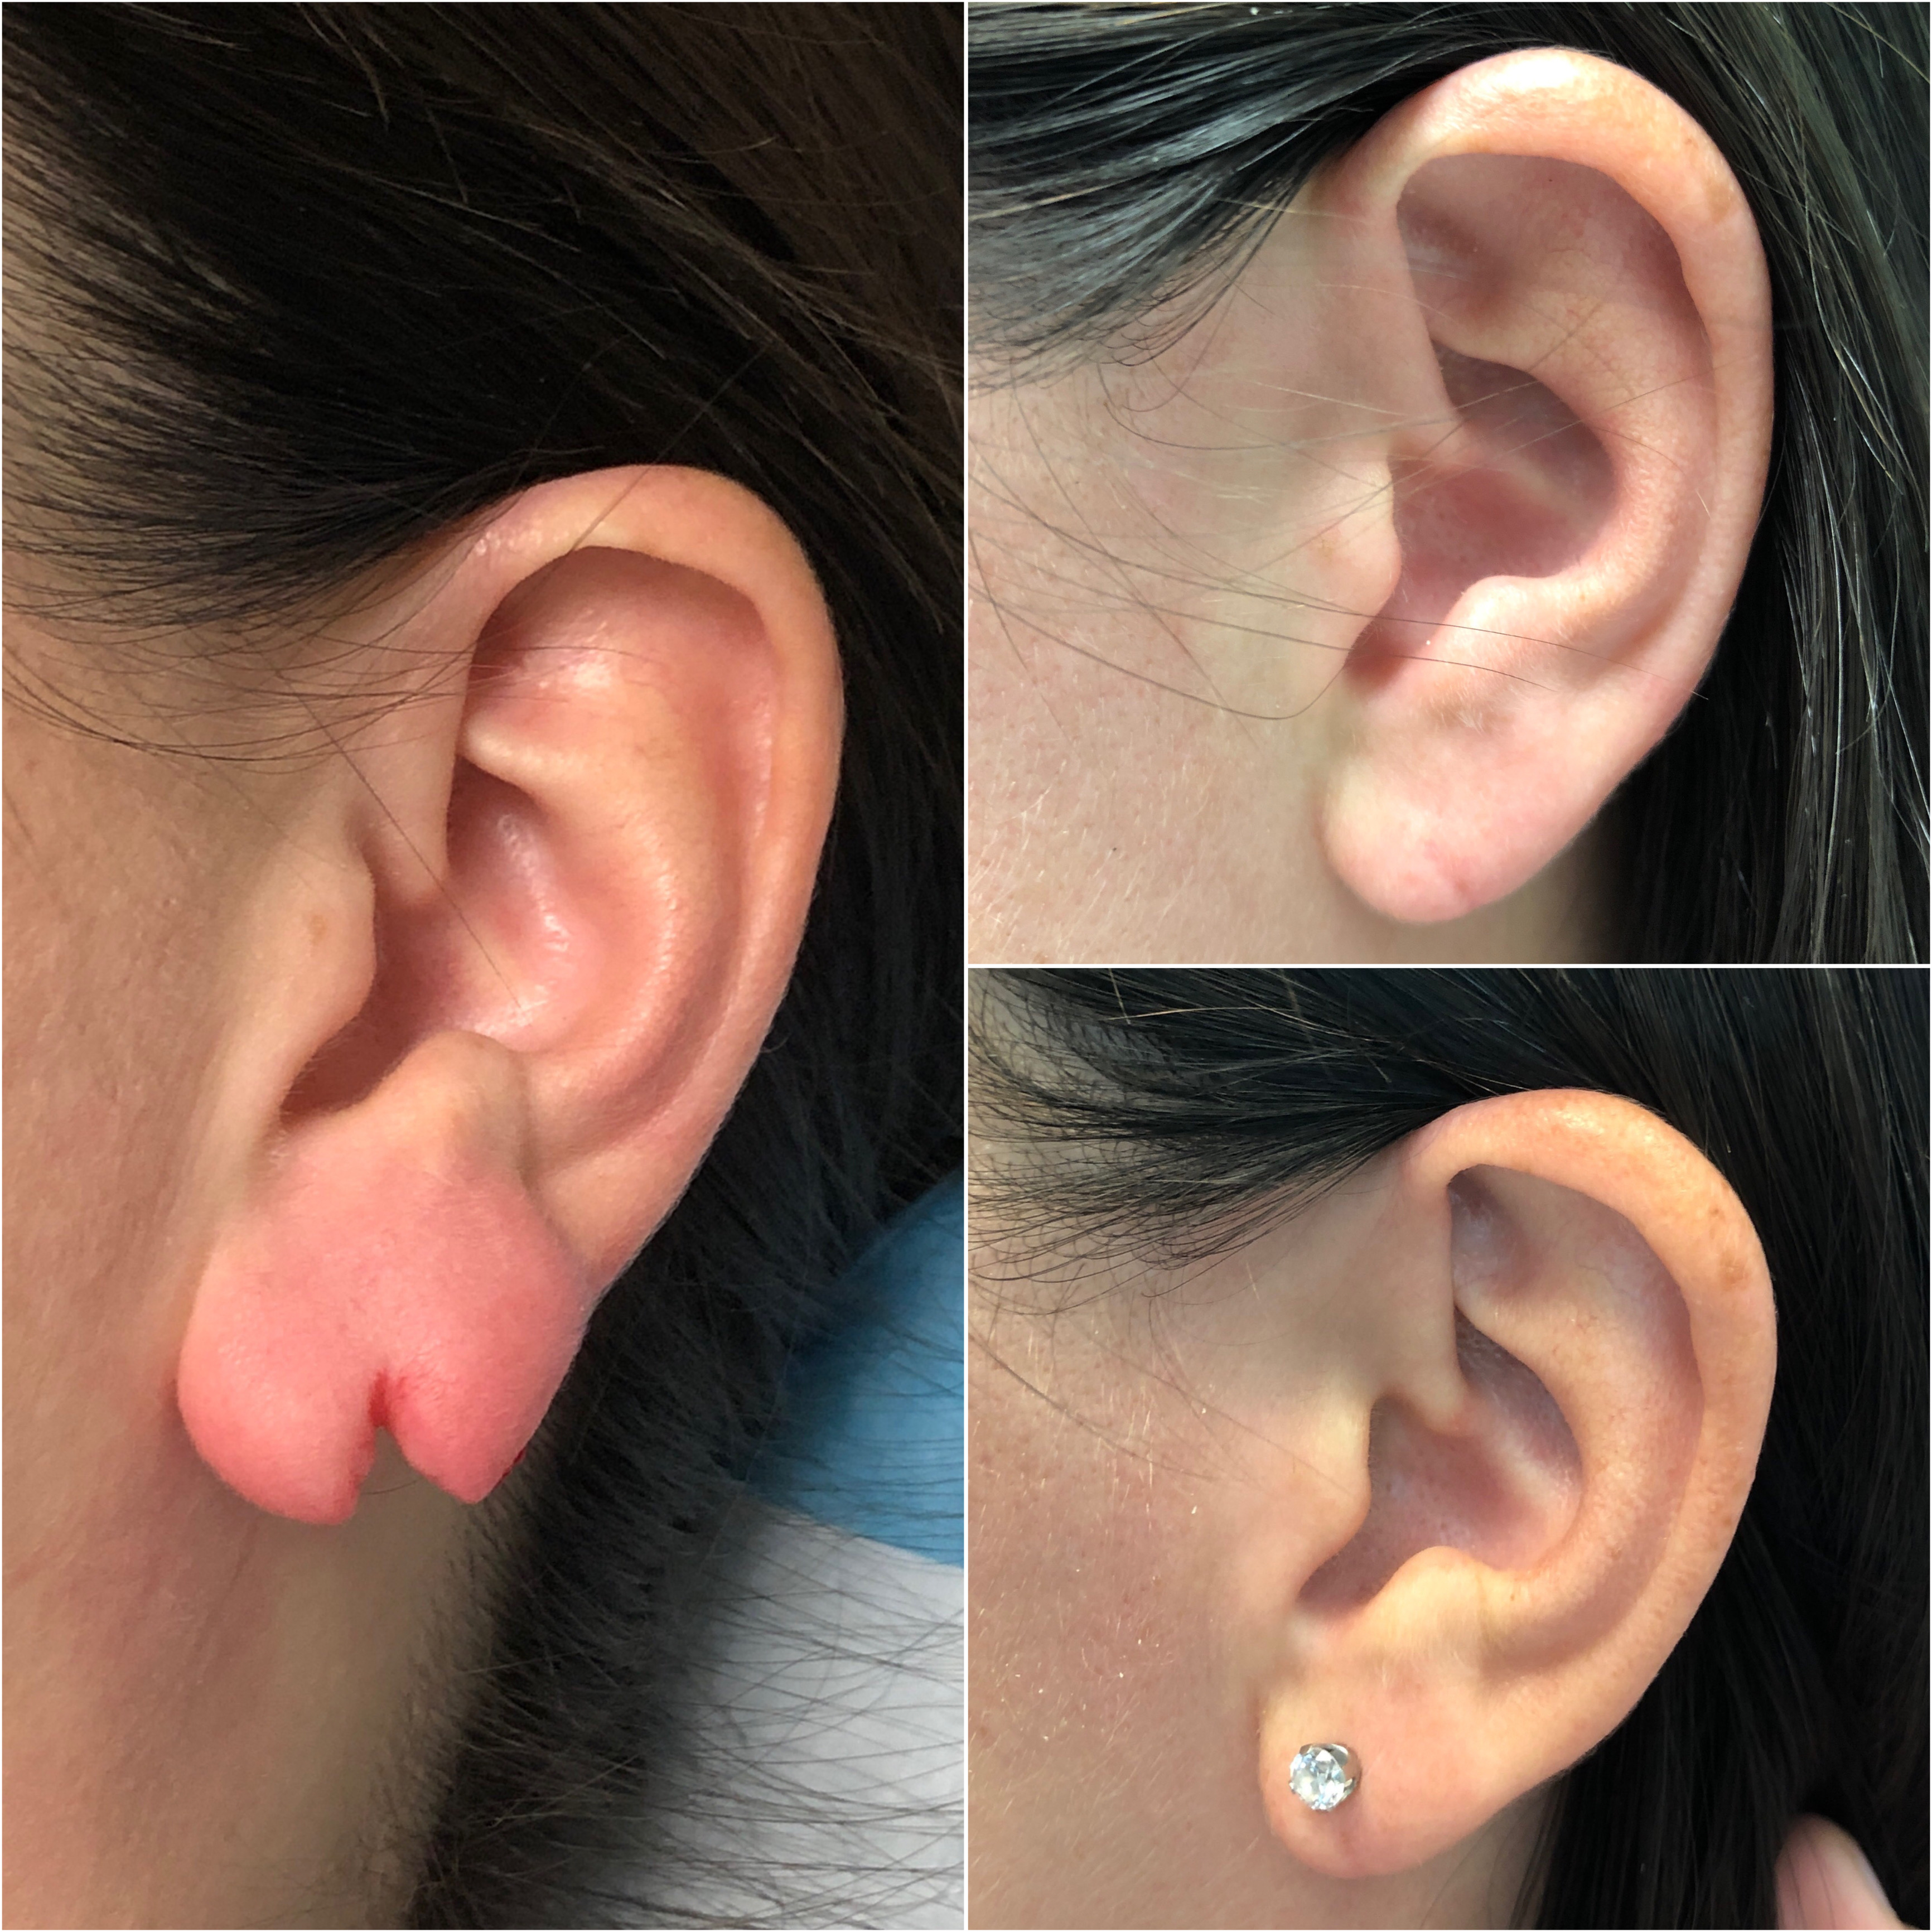 Torn and stretched ear lobe repairs - Kingsley Medical